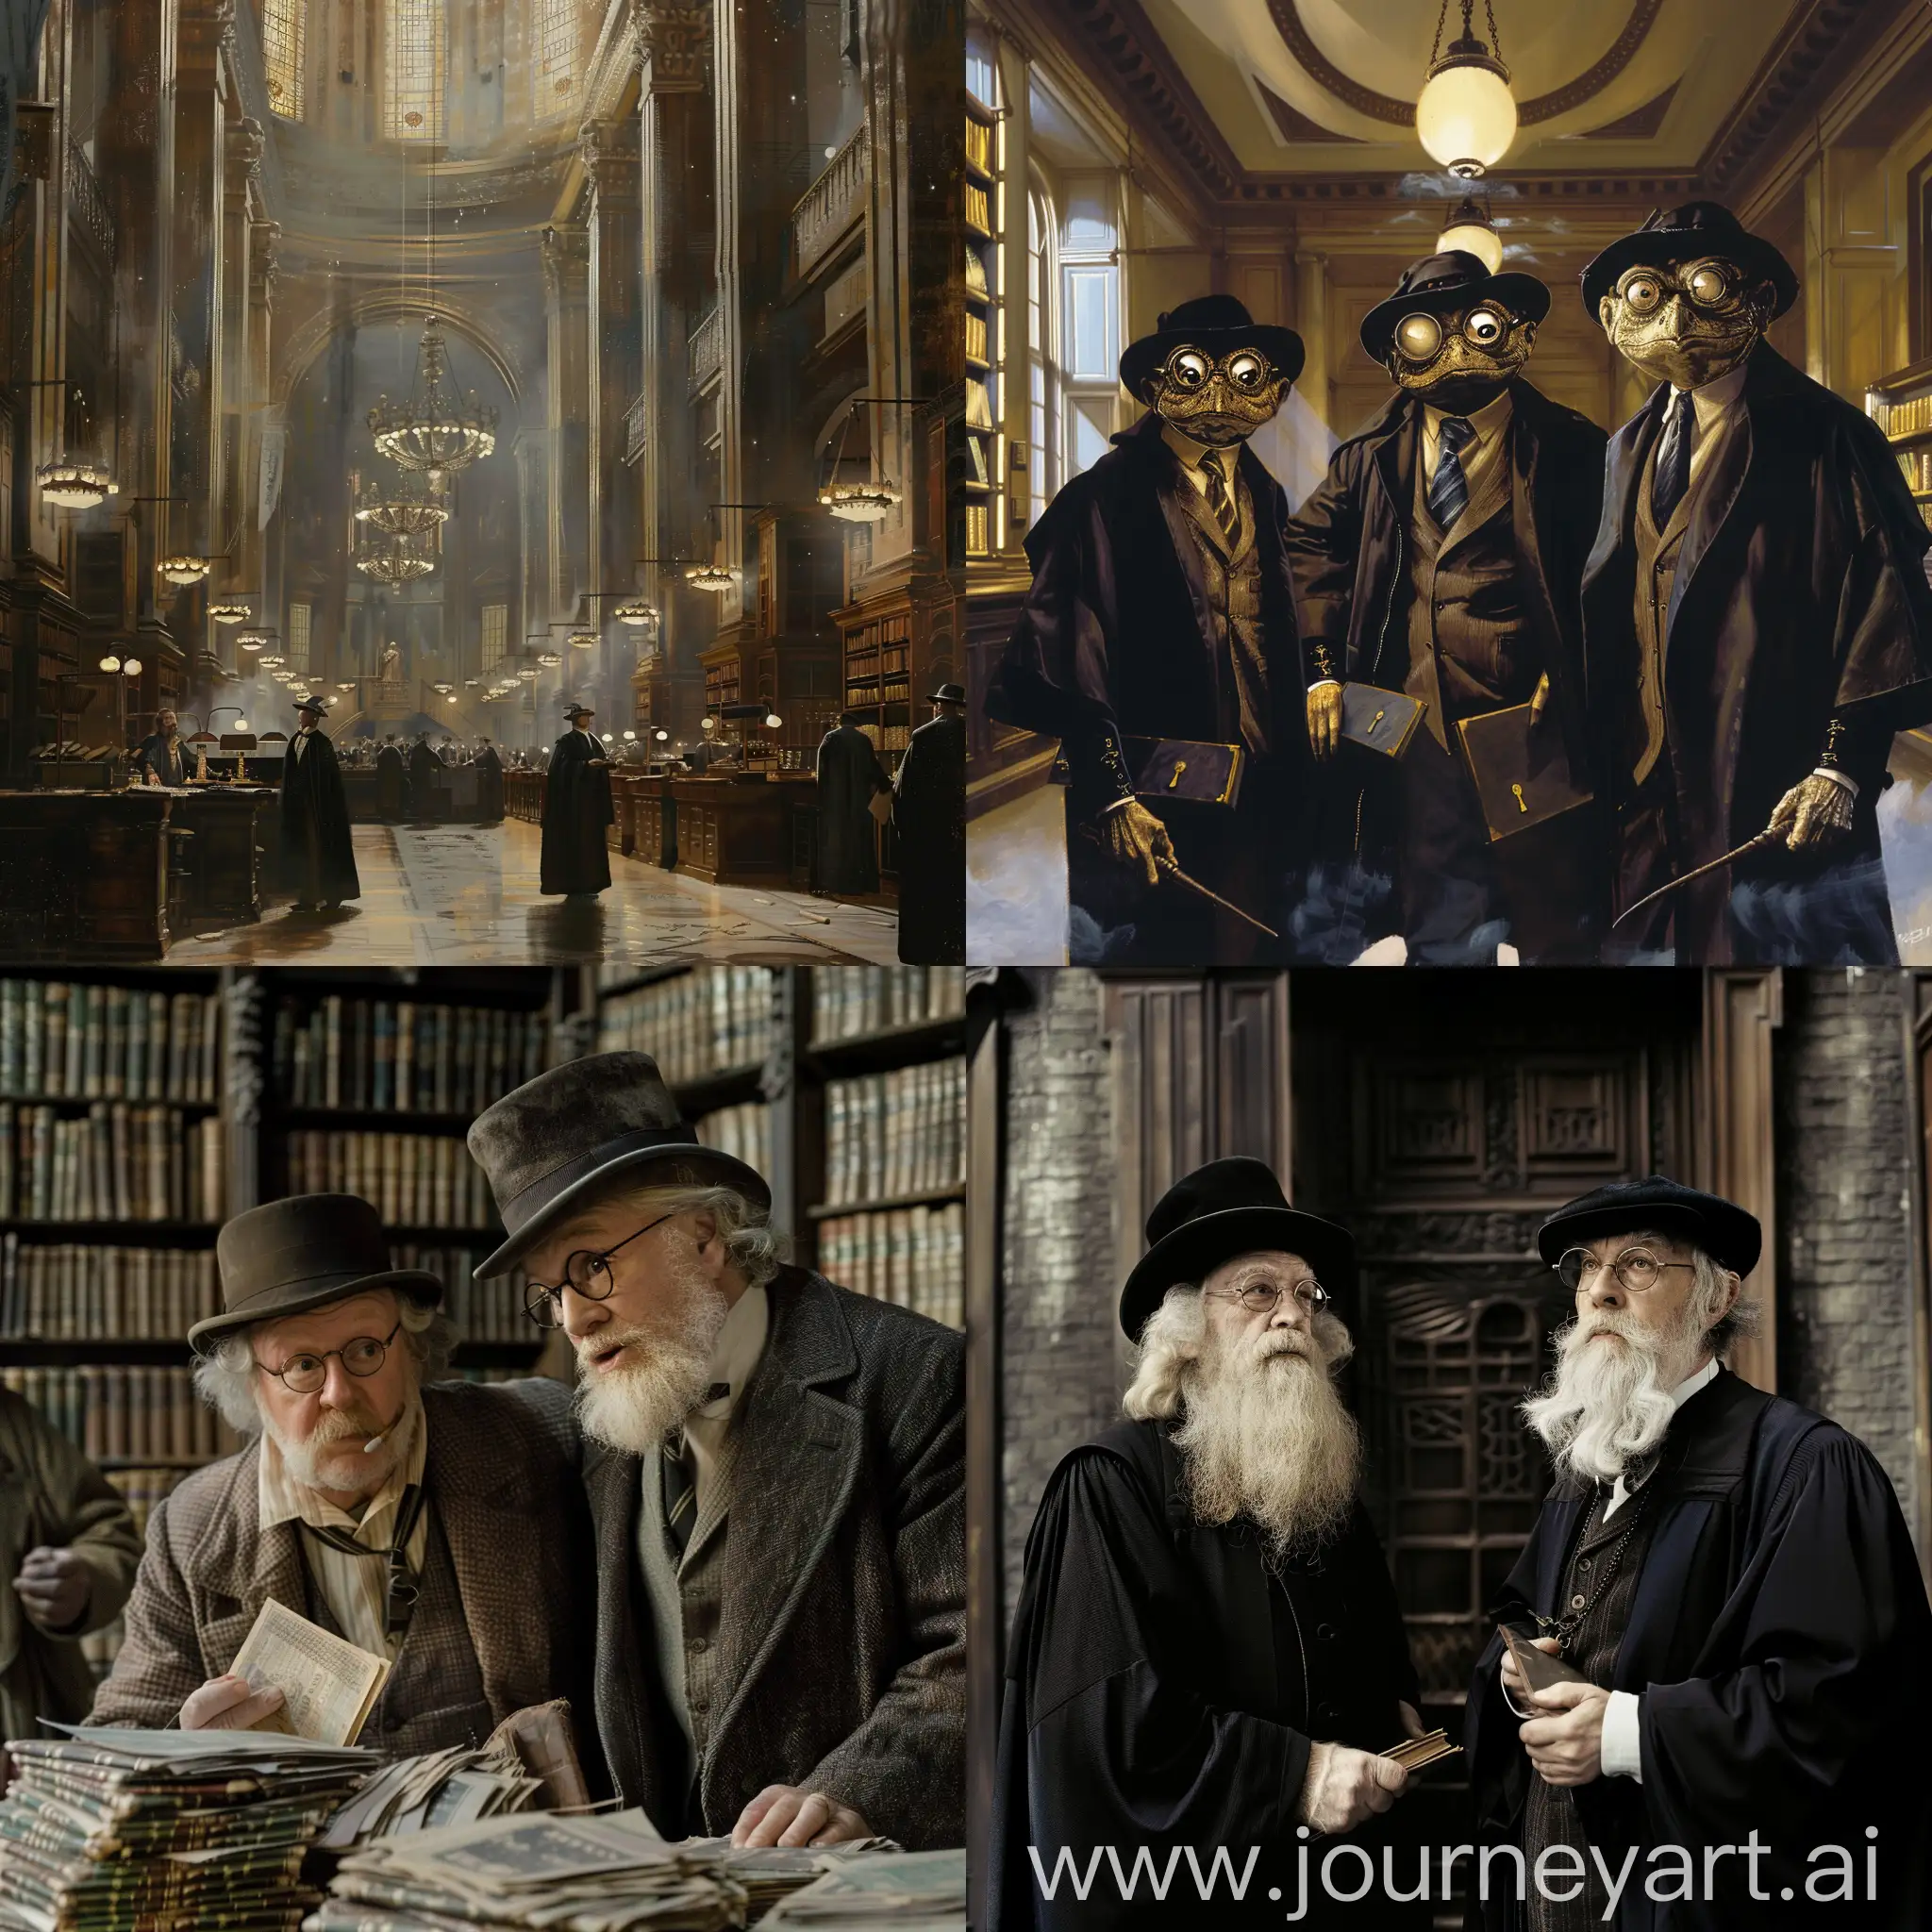 Wizarding-Bankers-in-Harry-Potter-Mysterious-Figures-Amidst-Magical-Surroundings